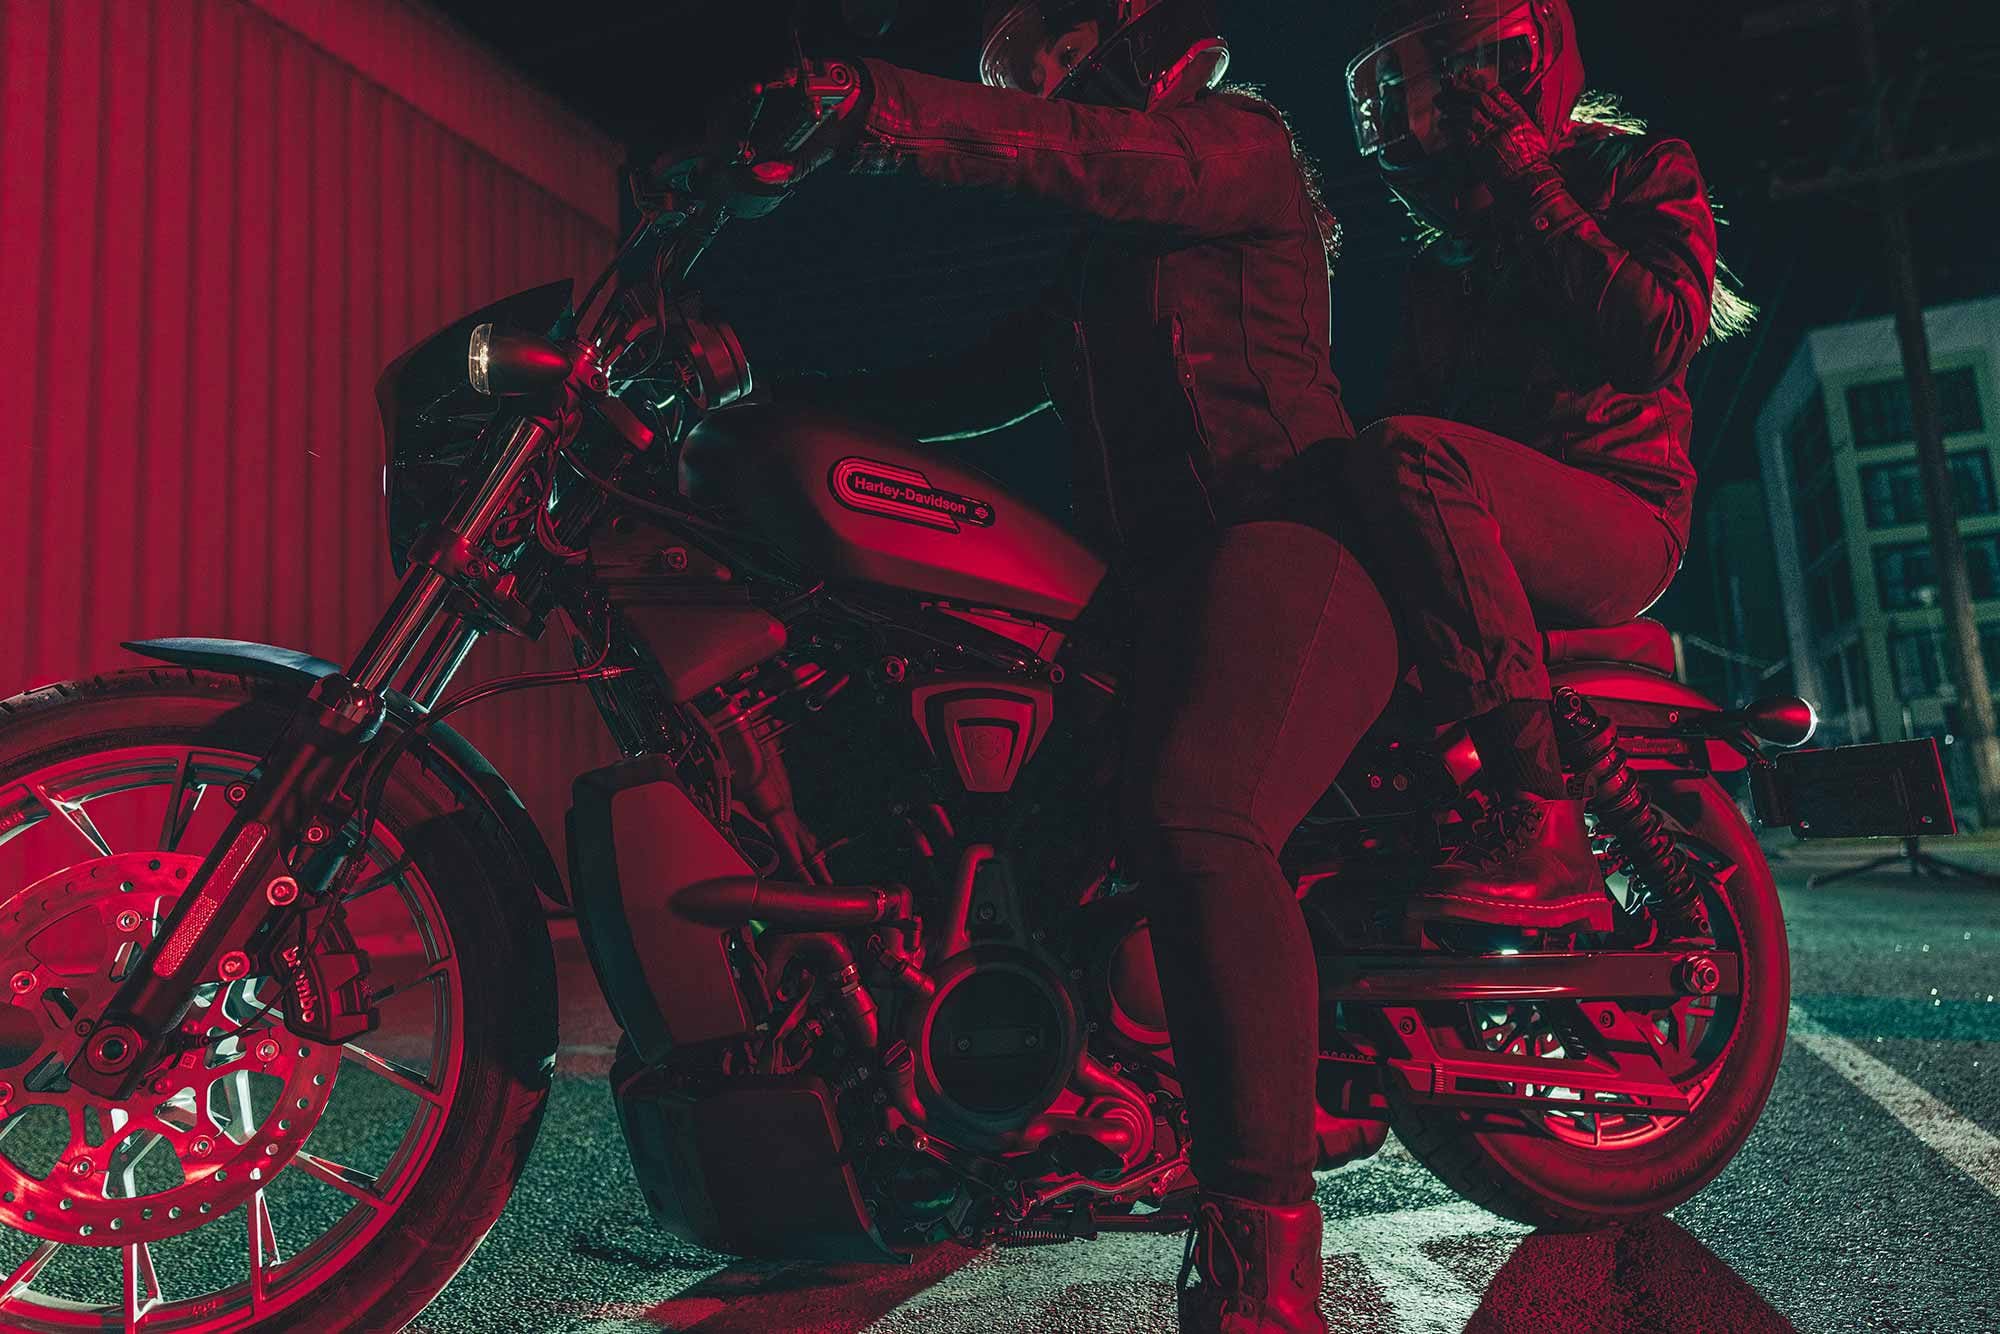 Because the night belongs to lovers (or riders): Bring either one with the newly standard passenger seat.